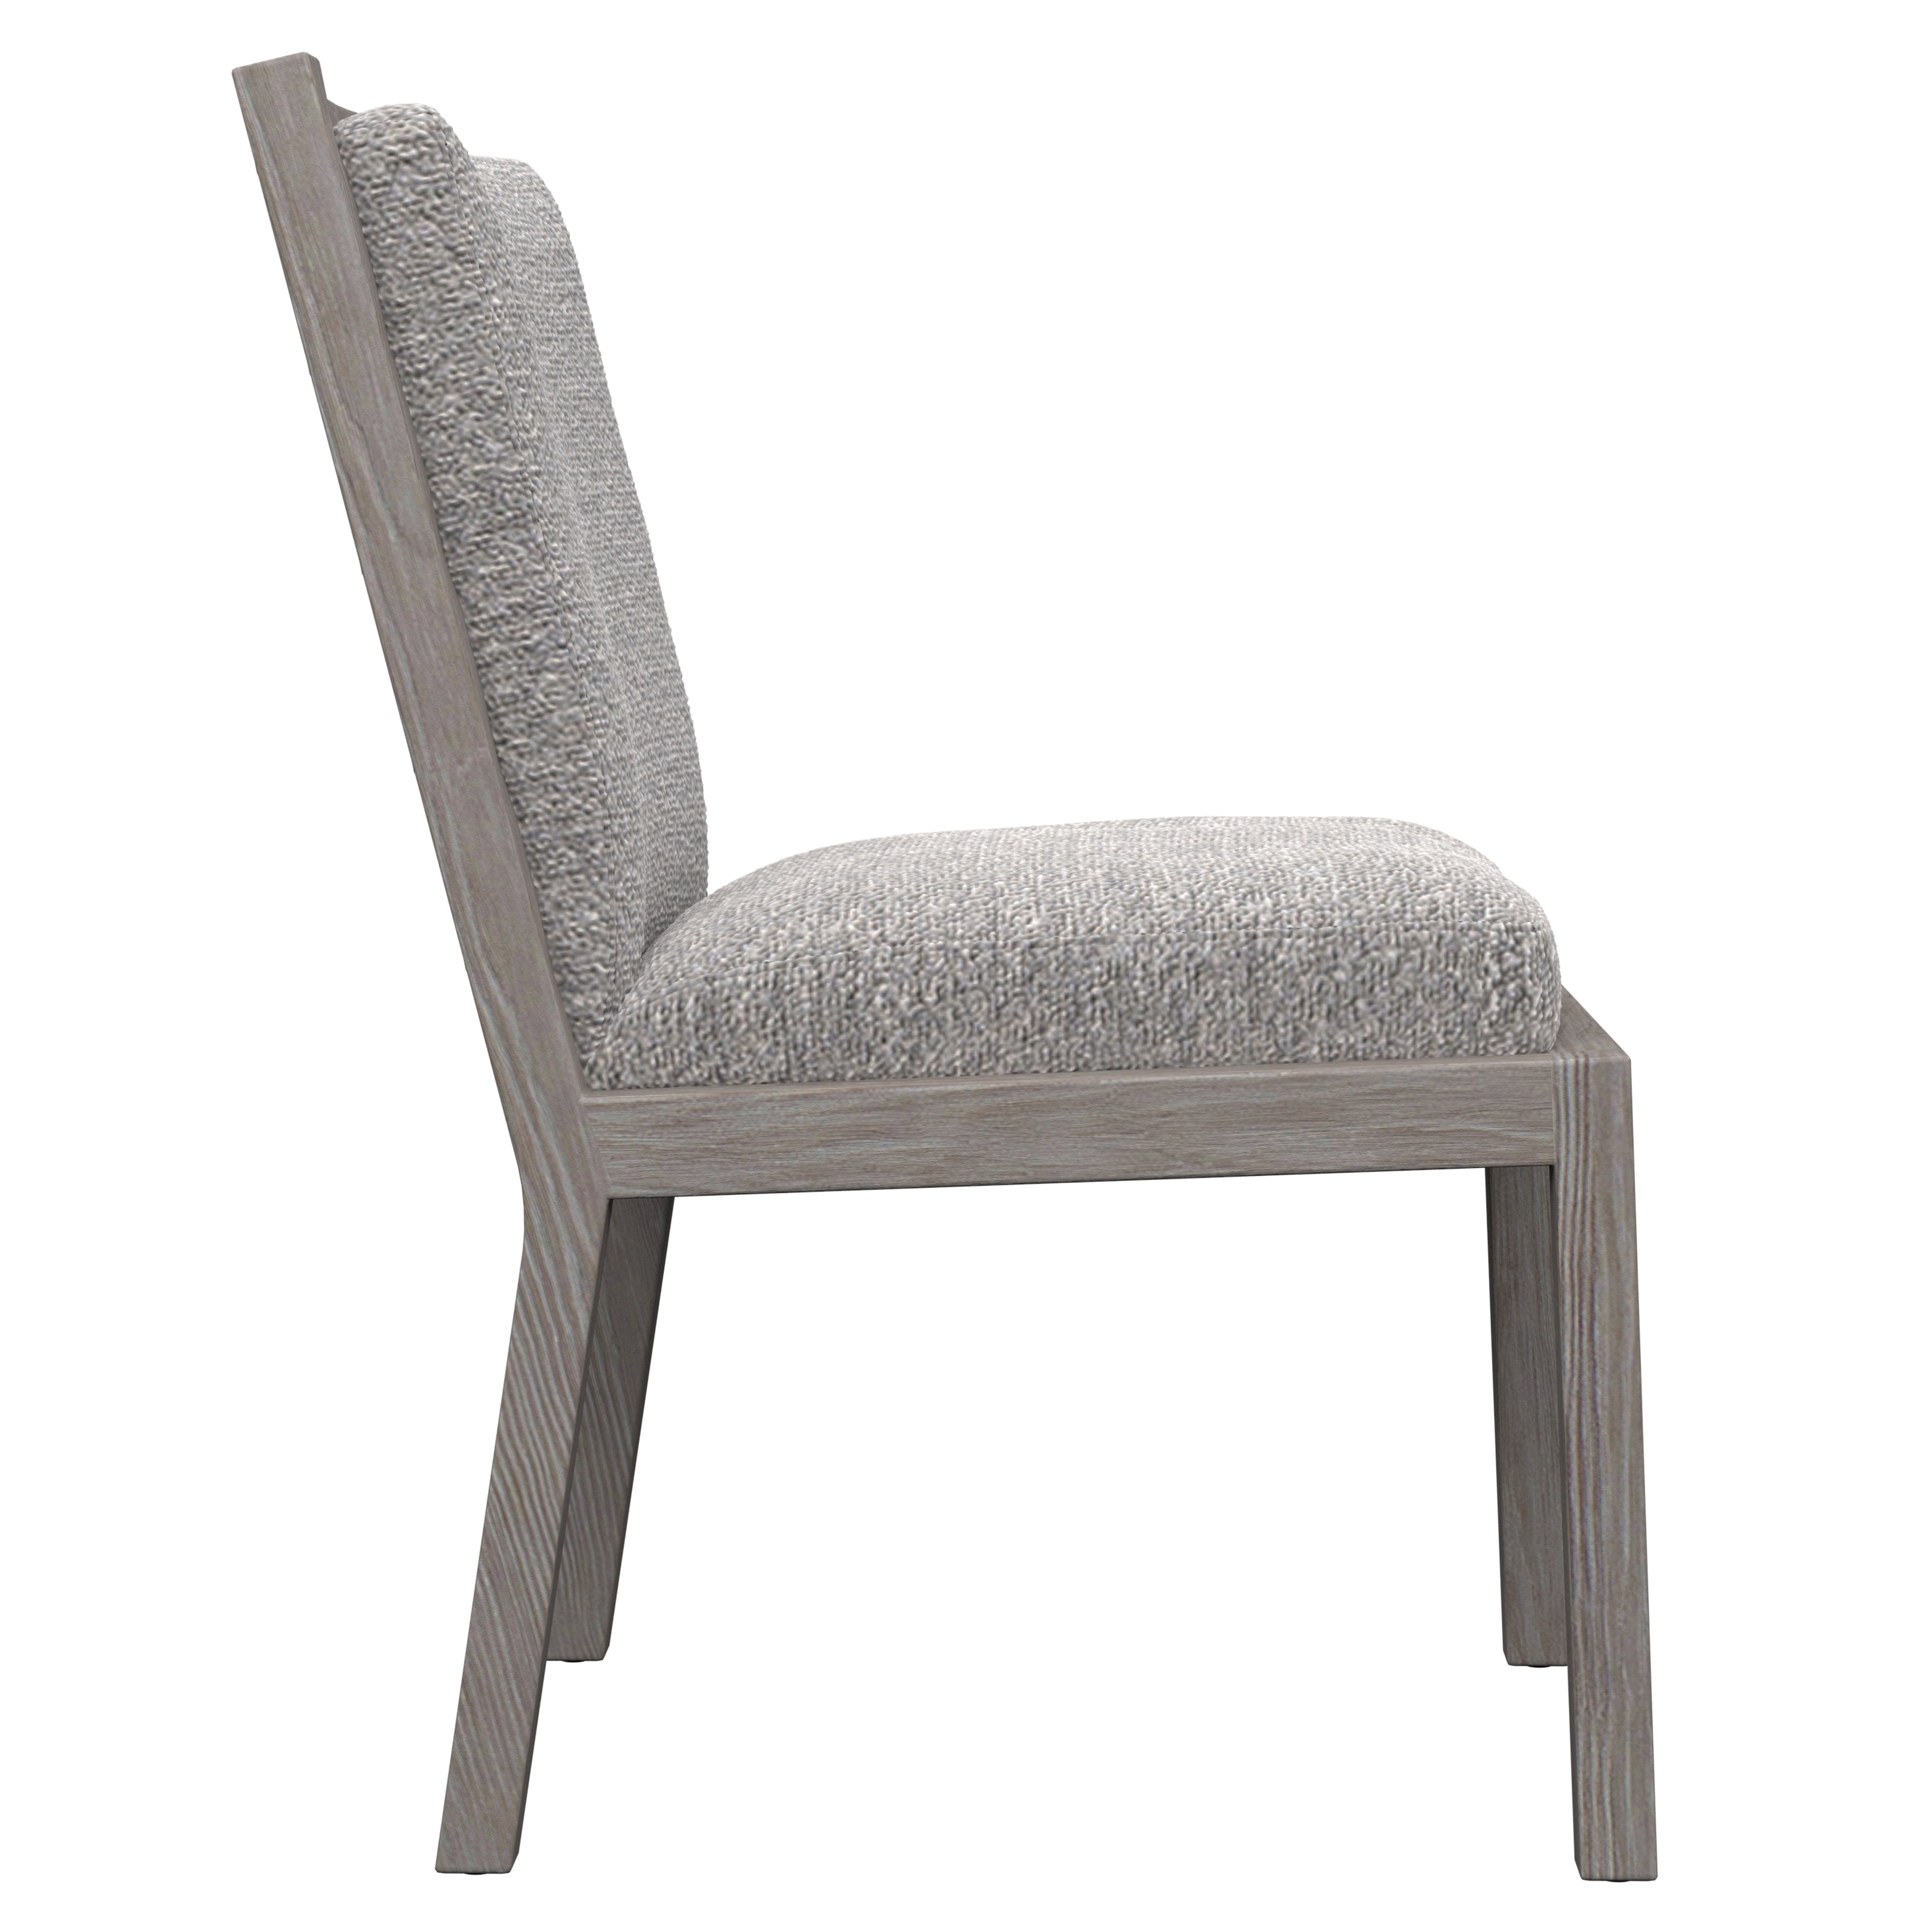 Trianon Ladderback Side Chair in Gris Finish